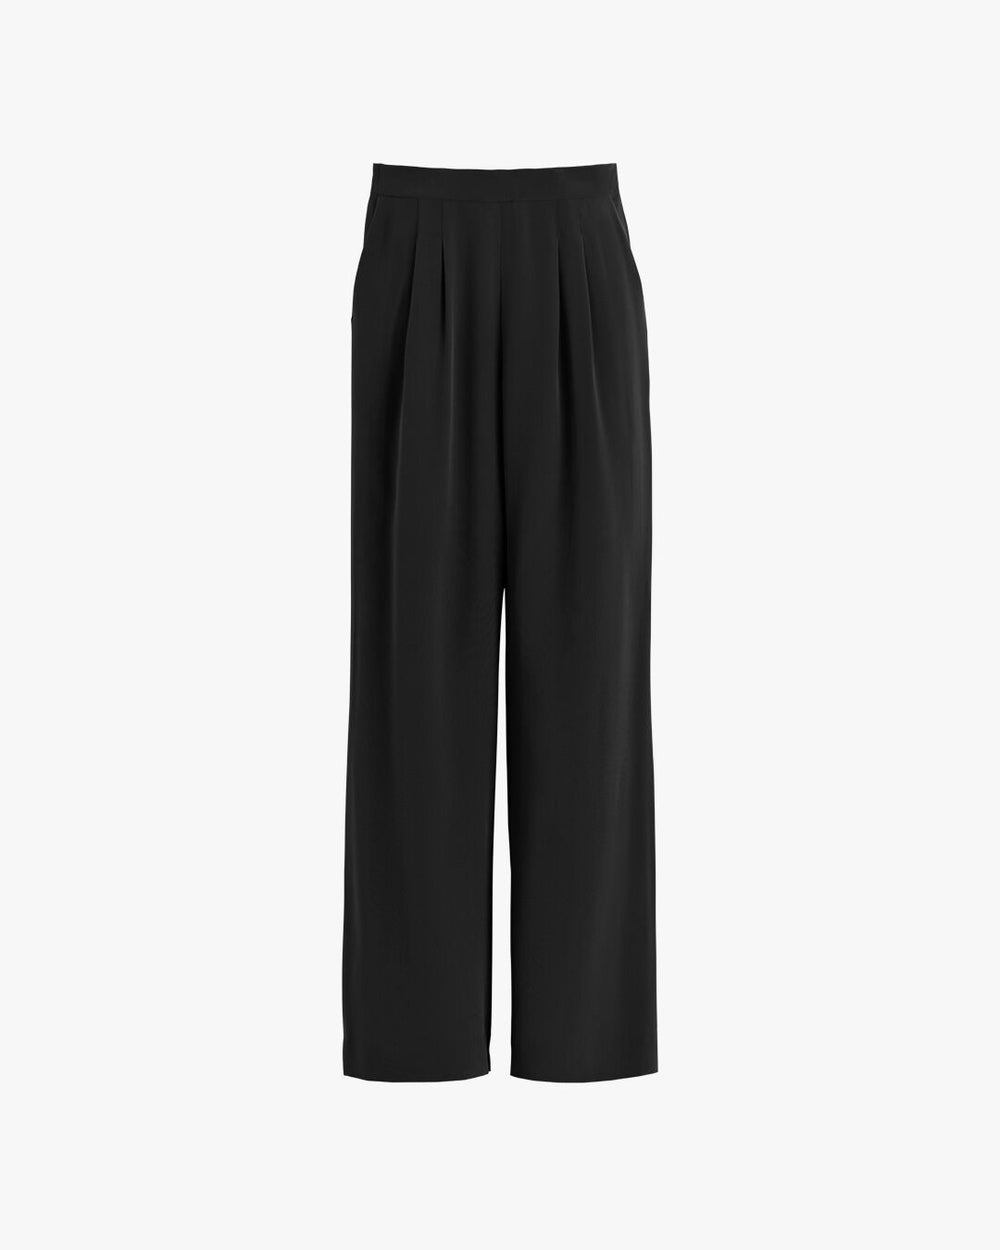 CAPSULE Simply Be Plus Size Black Wide Leg Trousers Stretch Waist Navy  Black